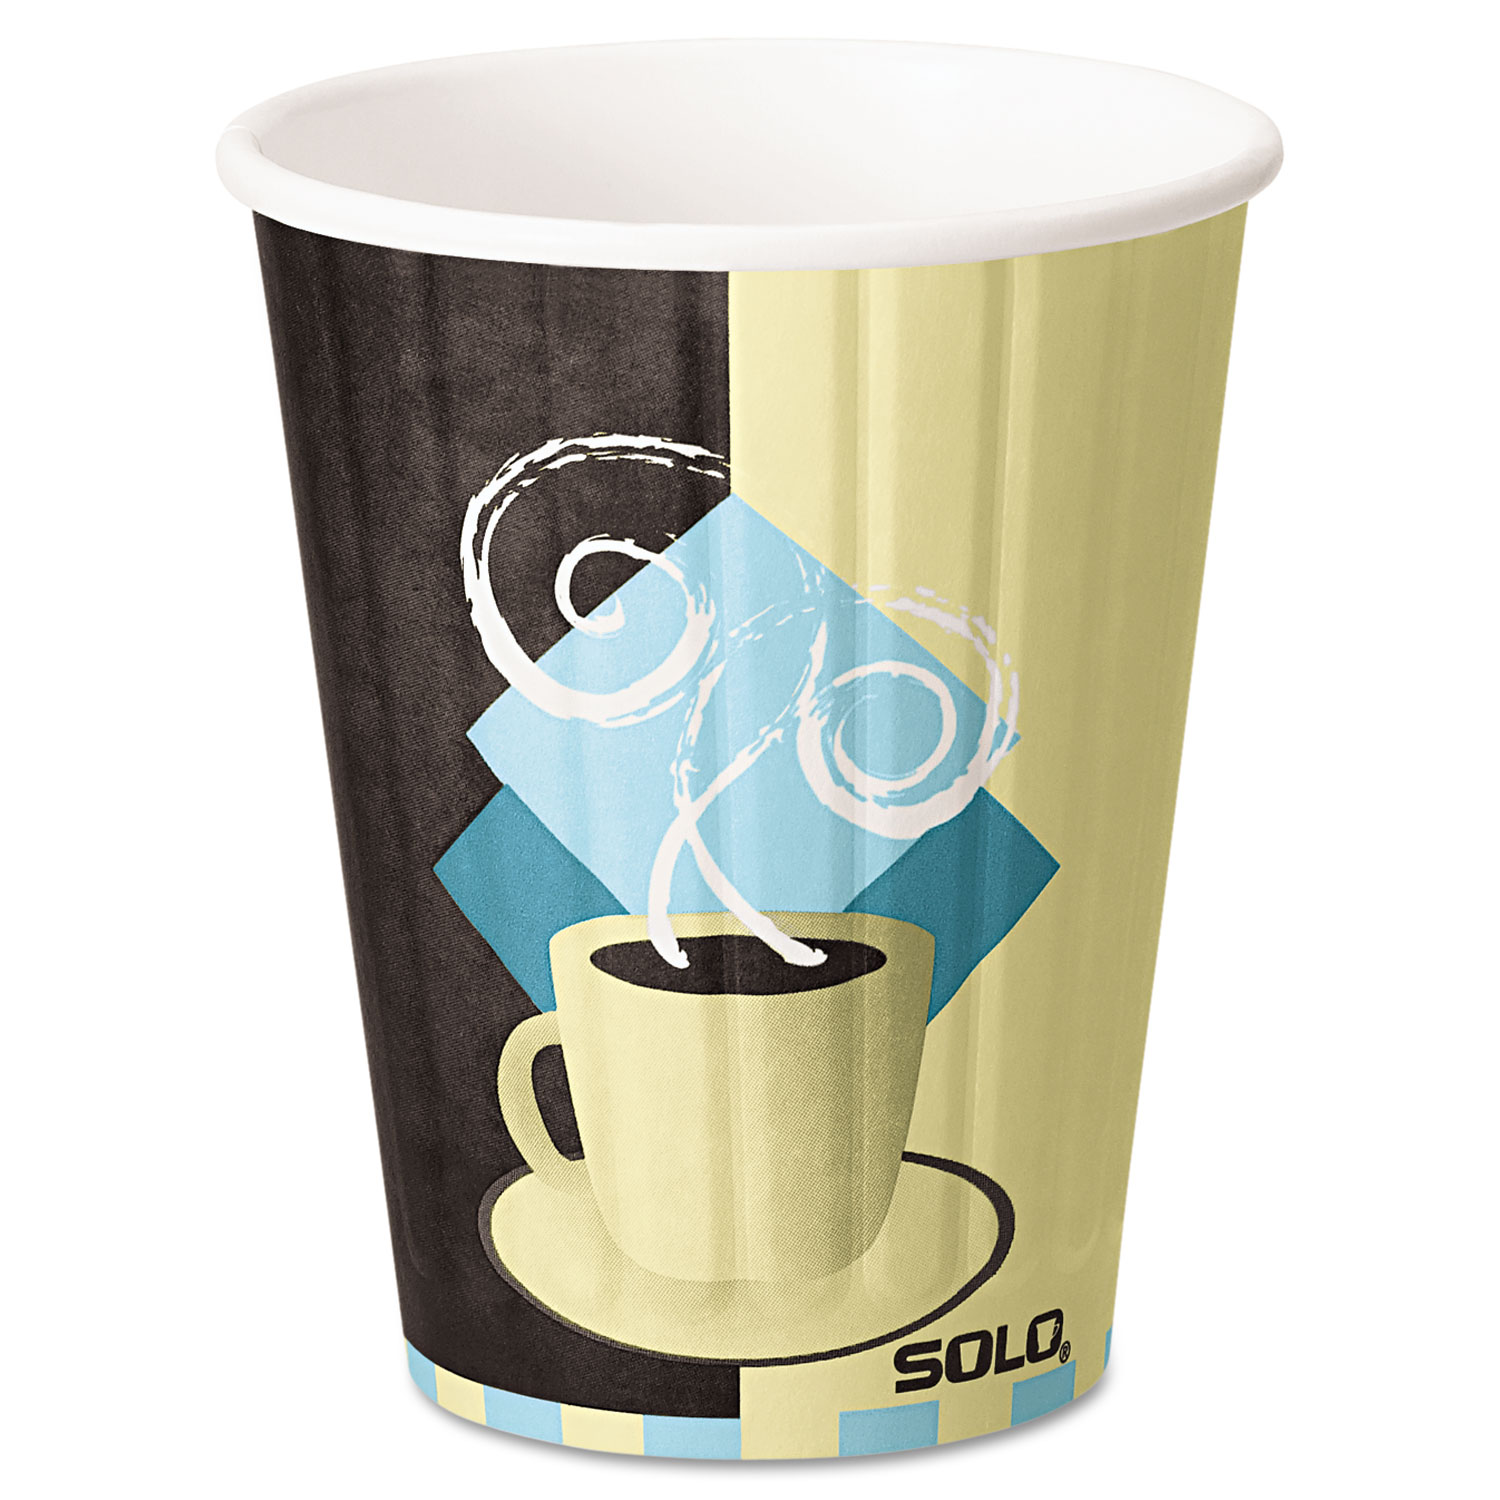  Dart IC12-J7534 Duo Shield Insulated Paper Hot Cups, 12oz, Tuscan, Chocolate/Blue/Beige, 600/Ct (SCCIC12J7534CT) 